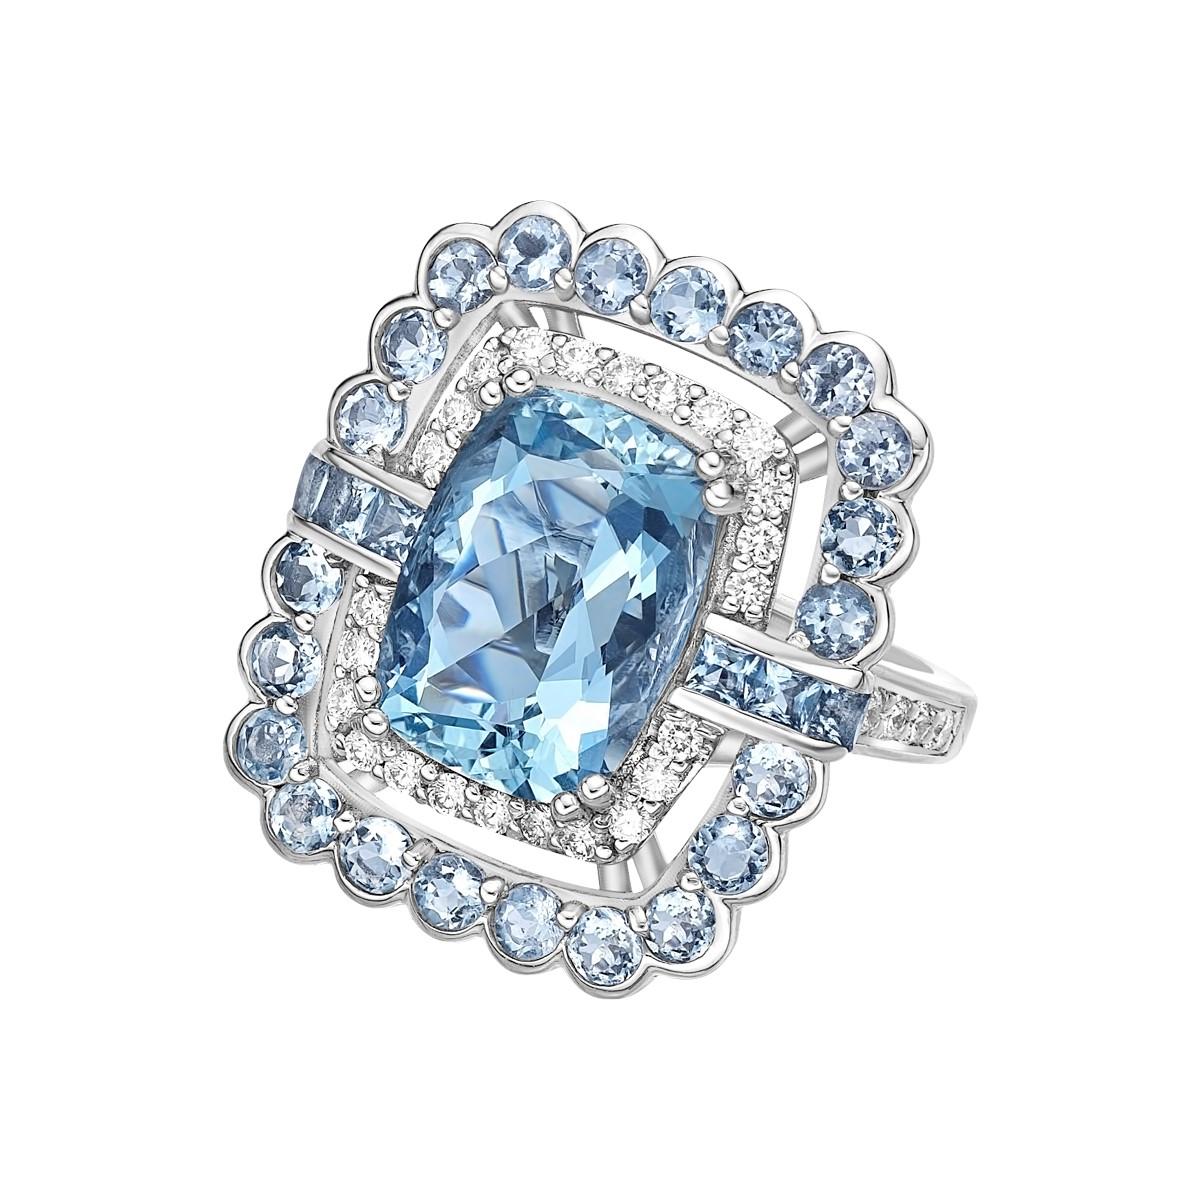 This collection features an array of aquamarines with an icy blue hue that is as cool as it gets! Accented with diamonds these rings are made in white gold and present a classic yet elegant look. 

4.81 Carat Aquamarine Ring with aquamarine and